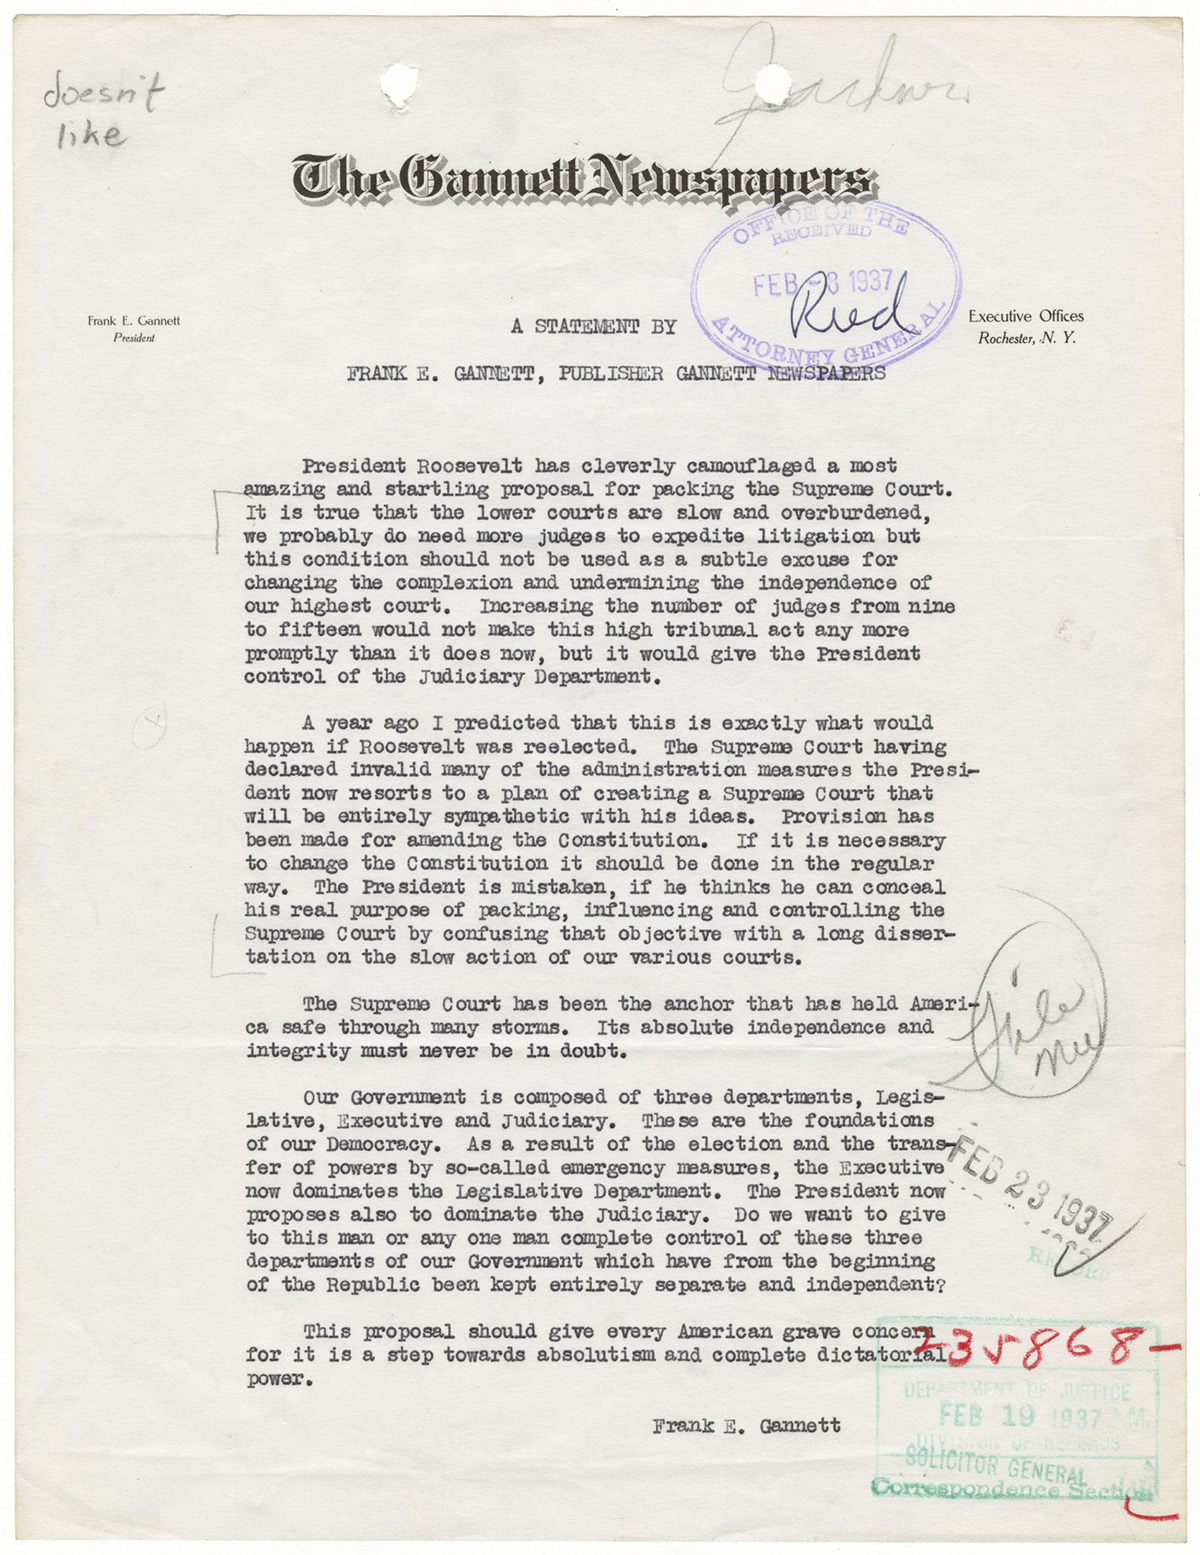 FDR and the Court-packing Controversy: Frank Gannett letter